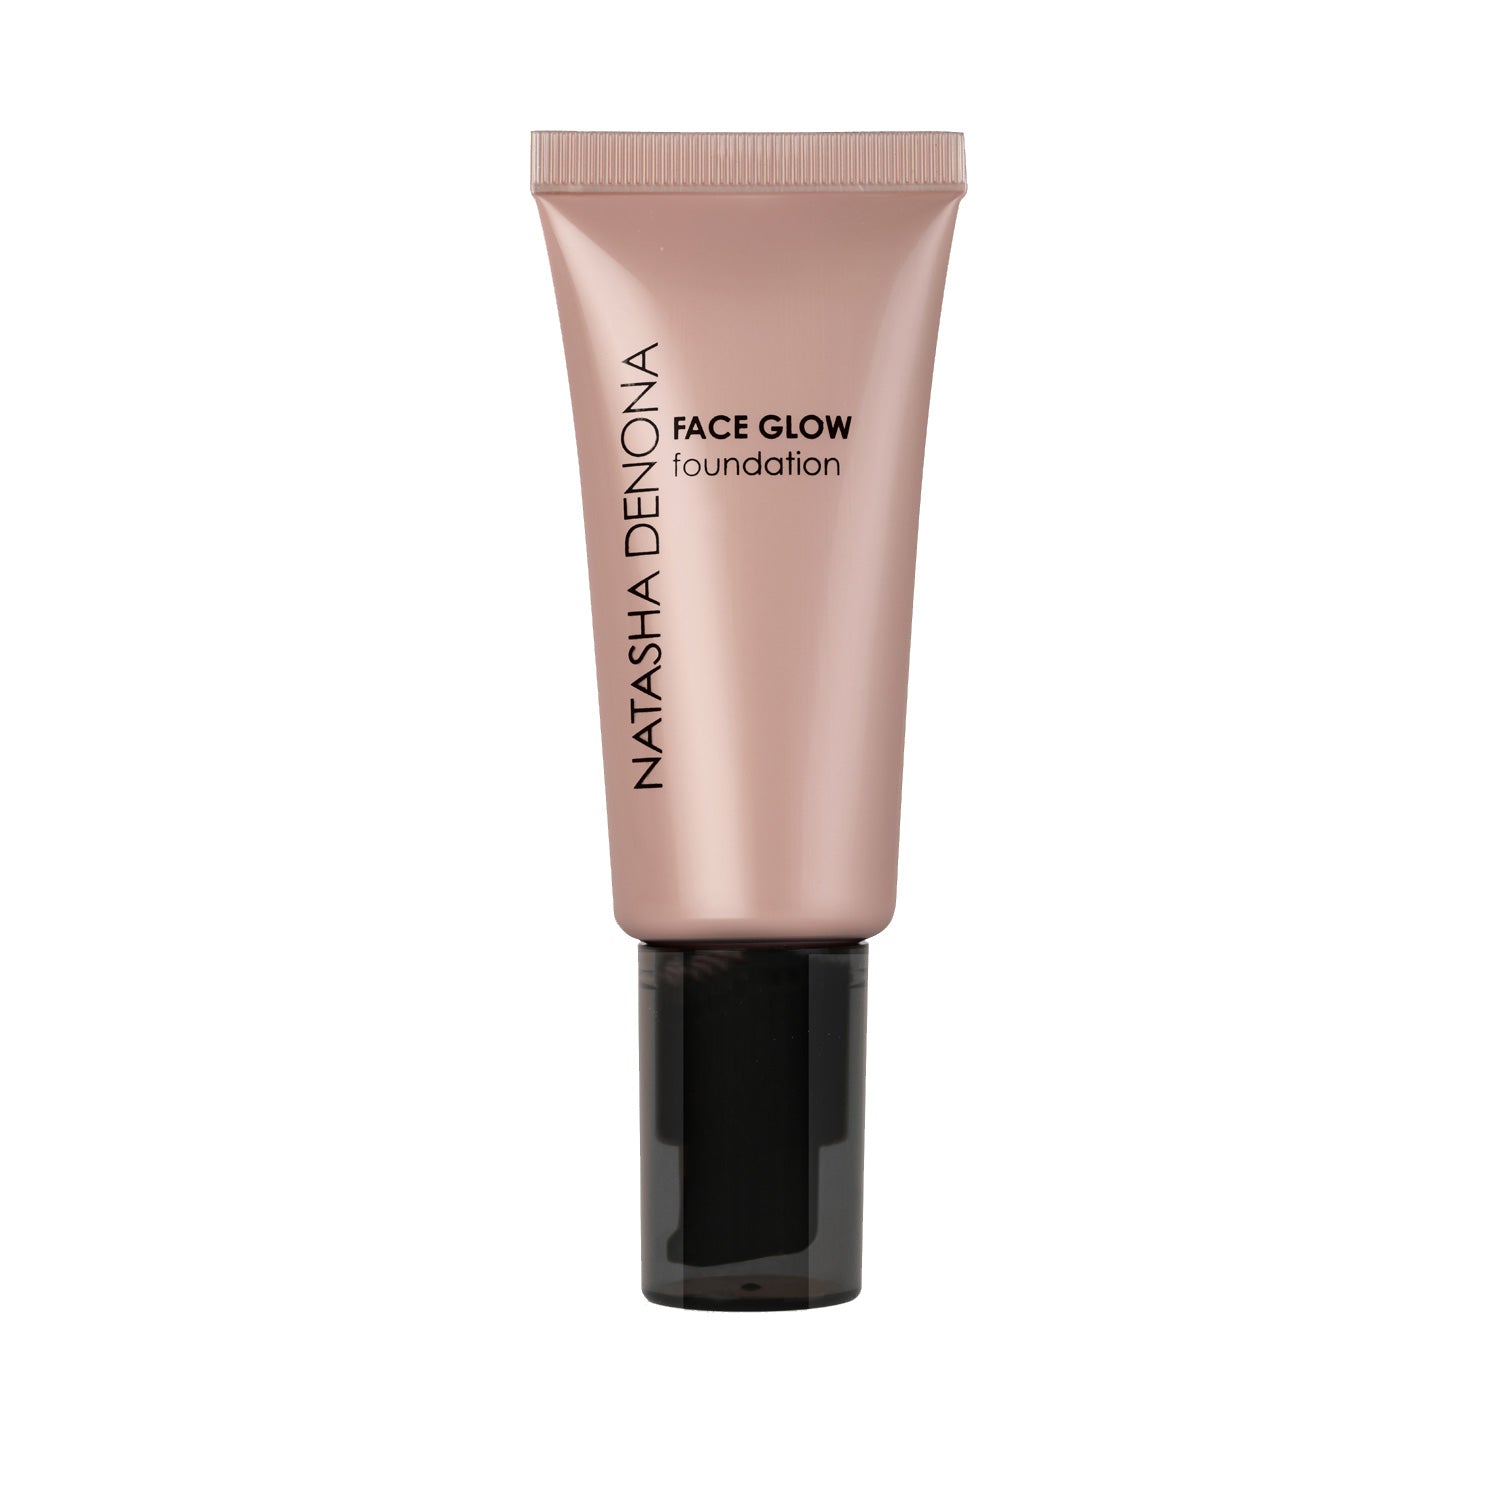 FACE GLOW FOUNDATION